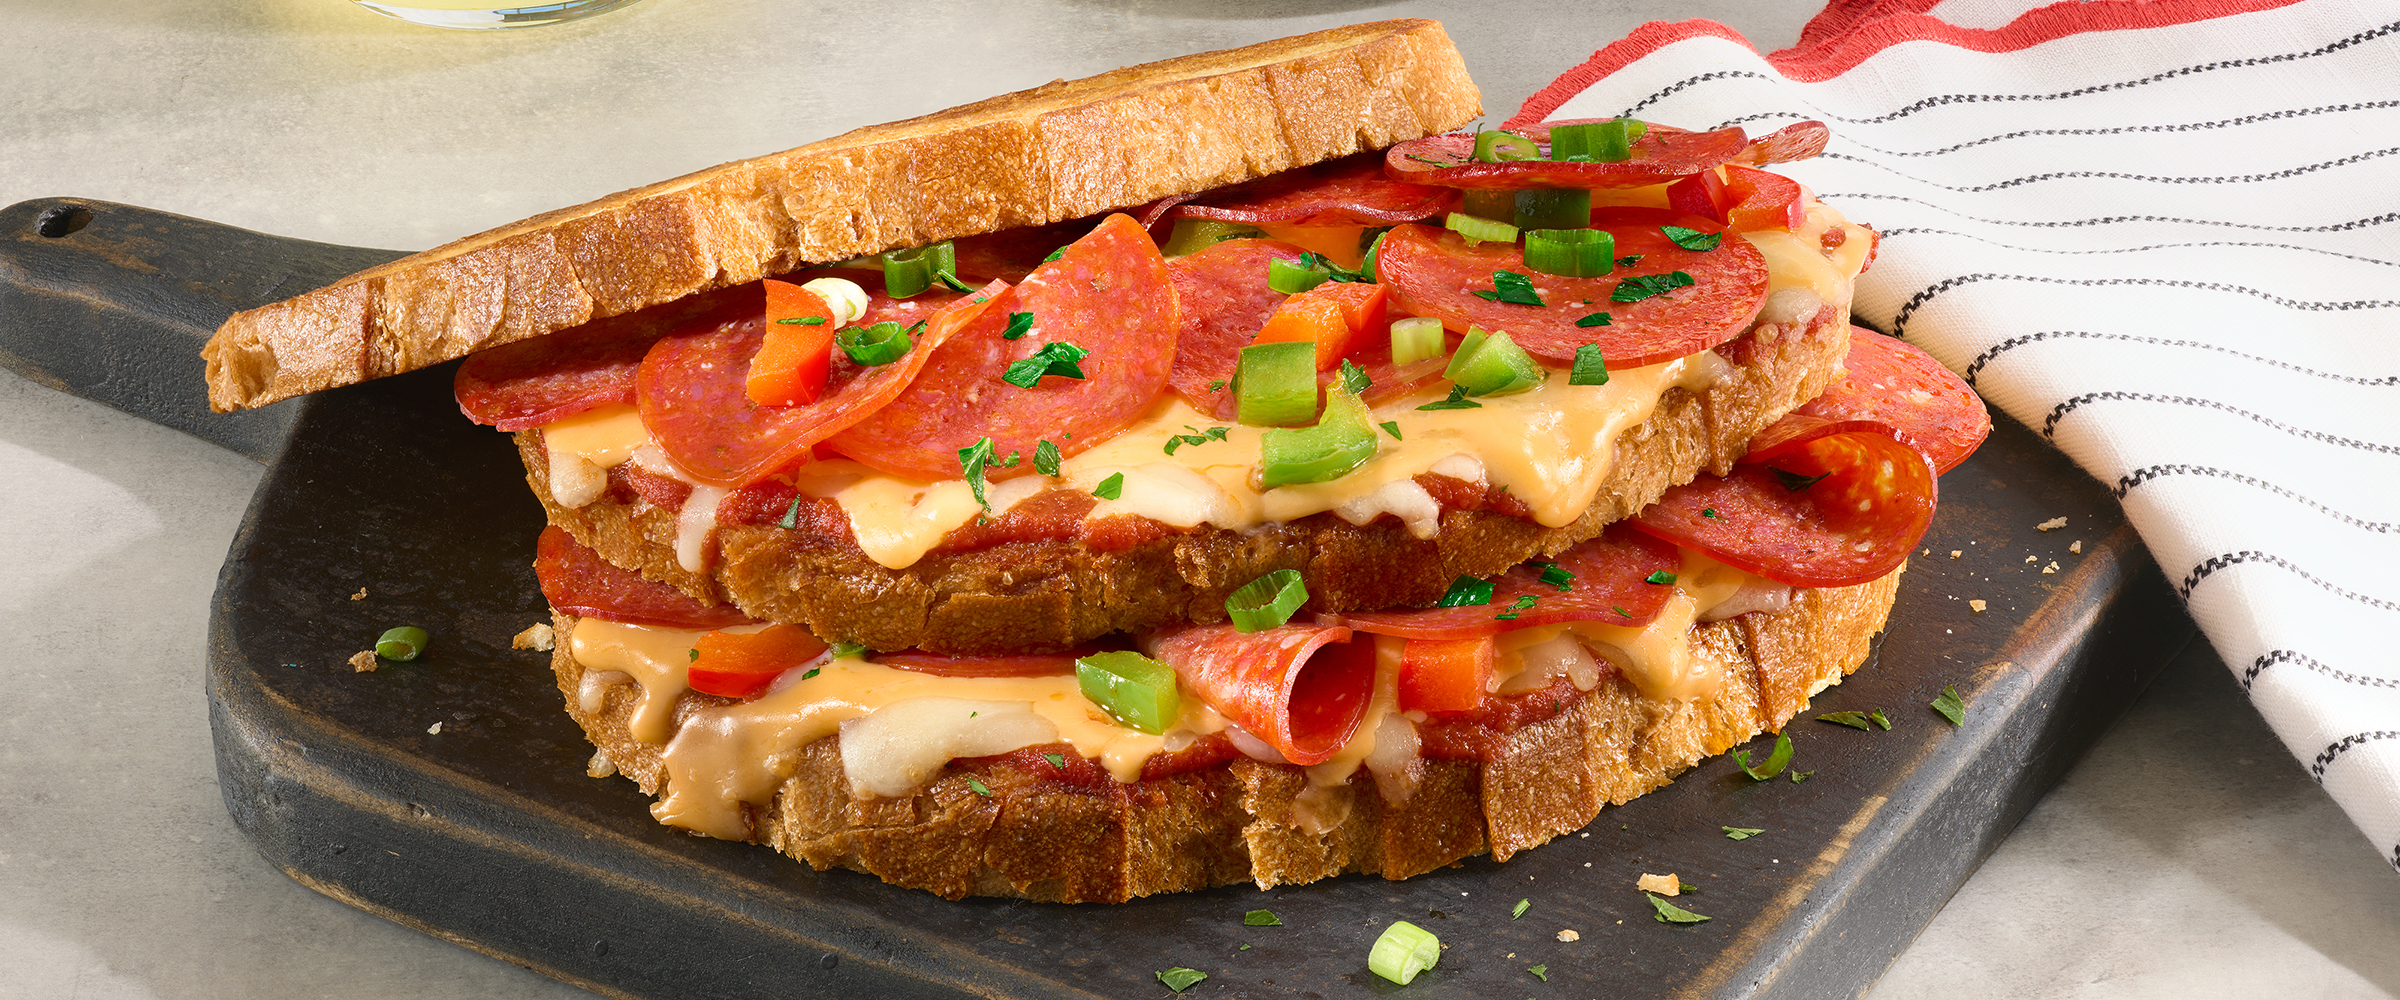 Double decker grilled cheese sandwich with pepperoni with diced green and red peppers